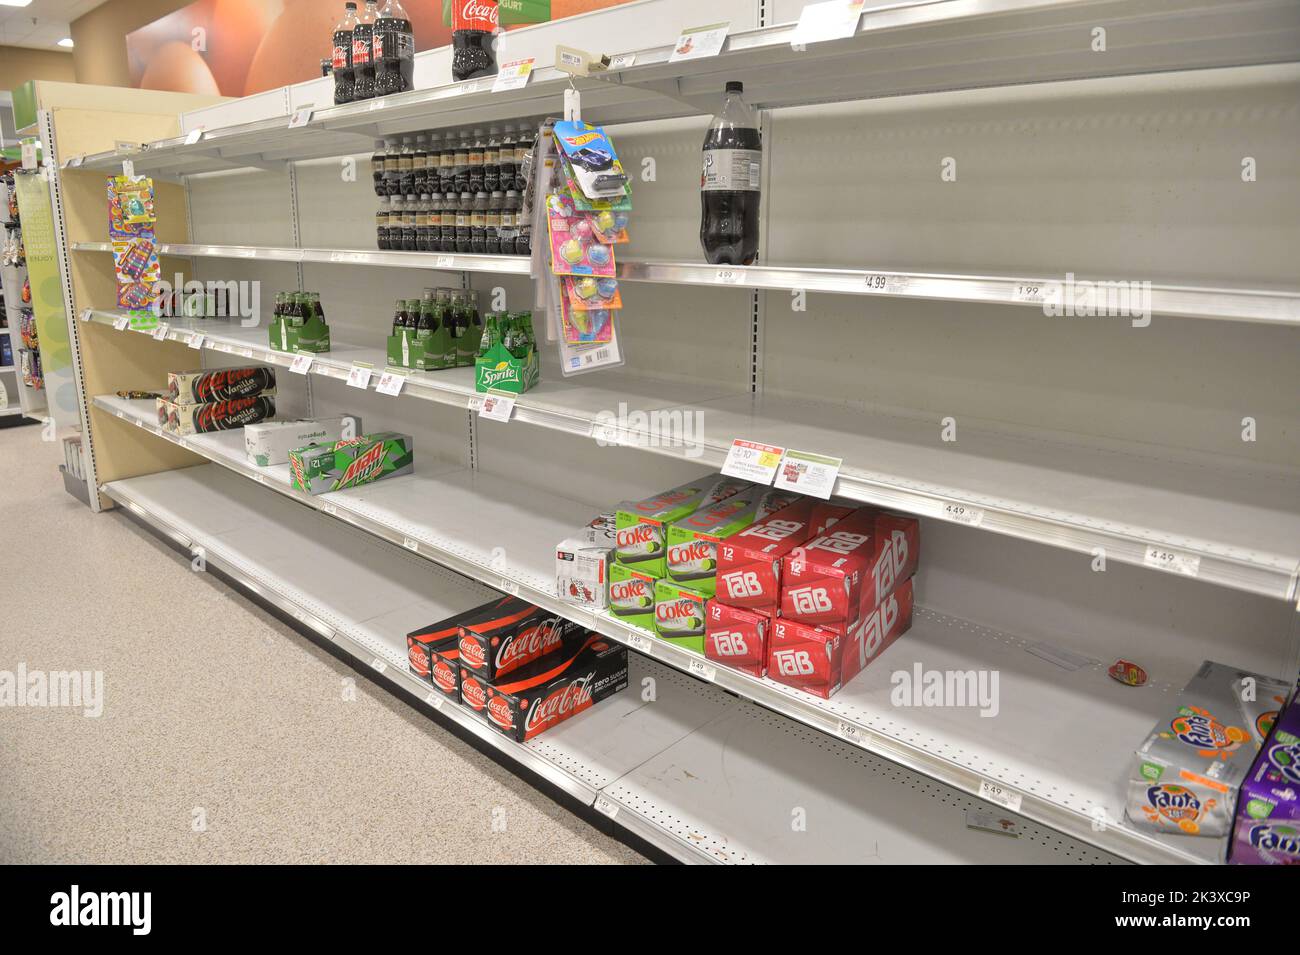 FORT LAUDERDALE, FL - SEPTEMBER 22, 2022: Hurricane Ian makes landfall in Florida as dangerous Category 4 hurricane. Historic File photos of Hurricanes in South Florida  People:  Food Stores Stock Photo